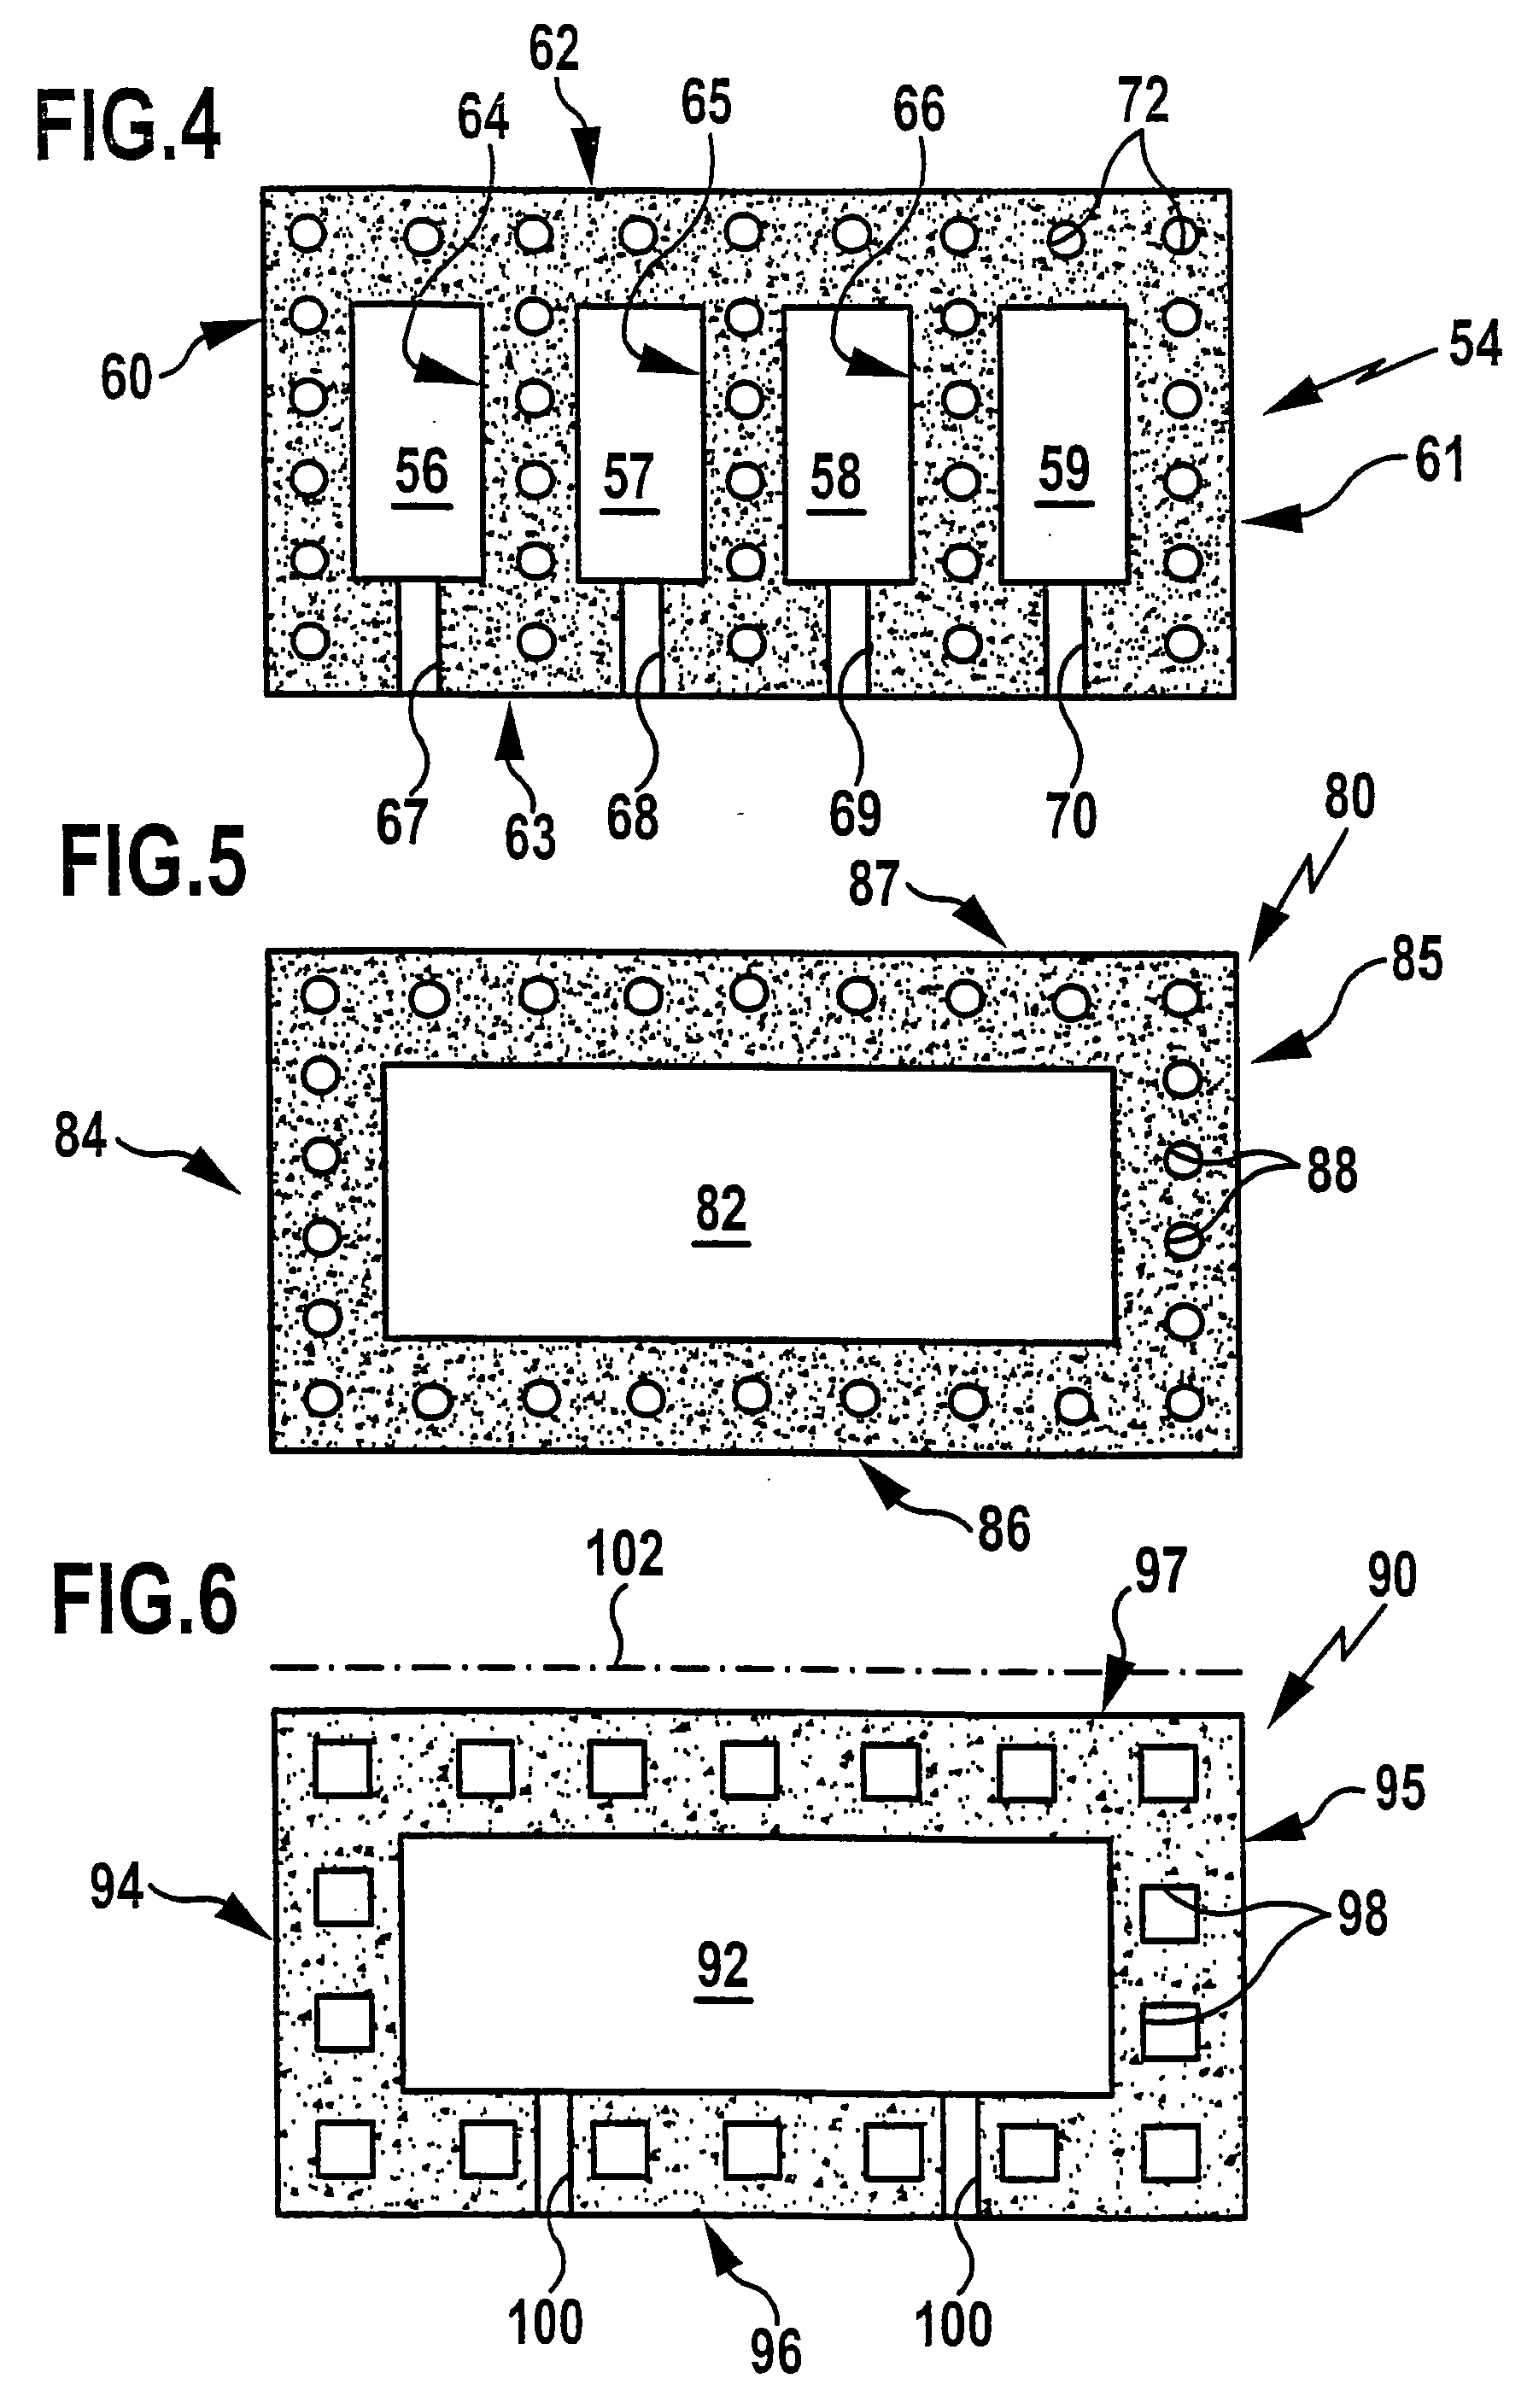 Spacer profile for an insulated glating unit